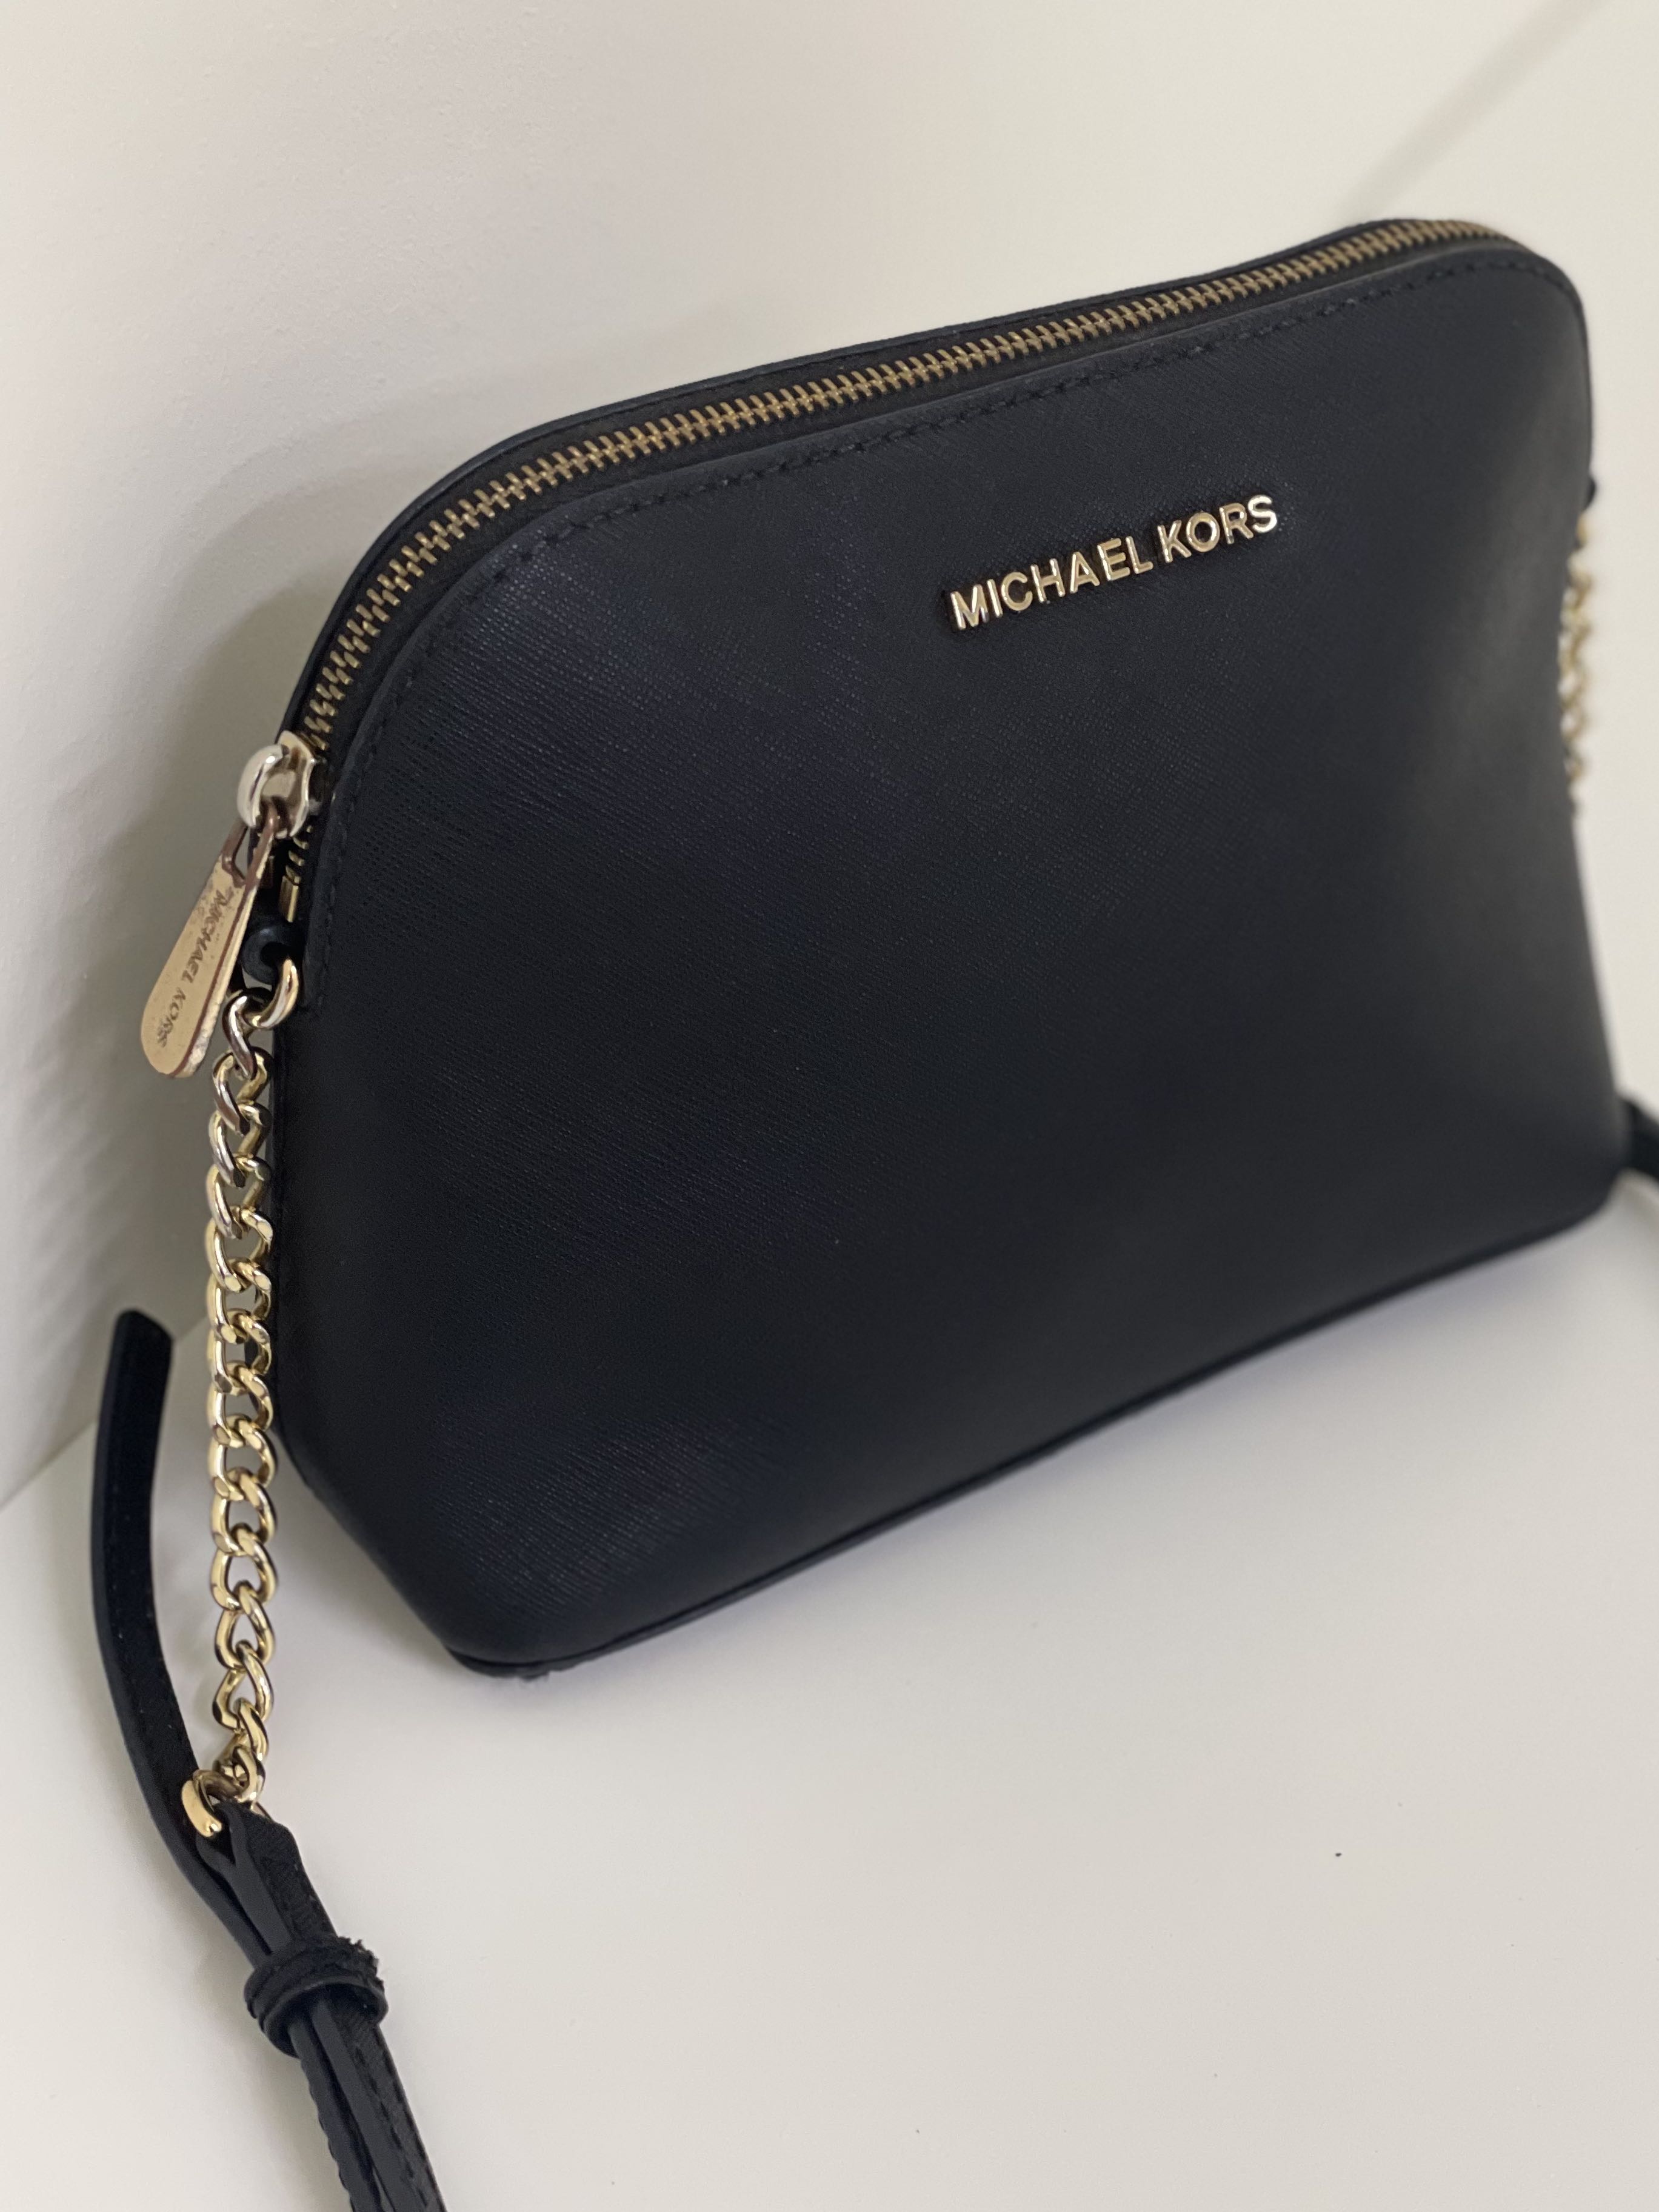 NWT Michael Michael Kors Cindy Large Dome Crossbody Leather Bag BLACK  AUTHENTIC